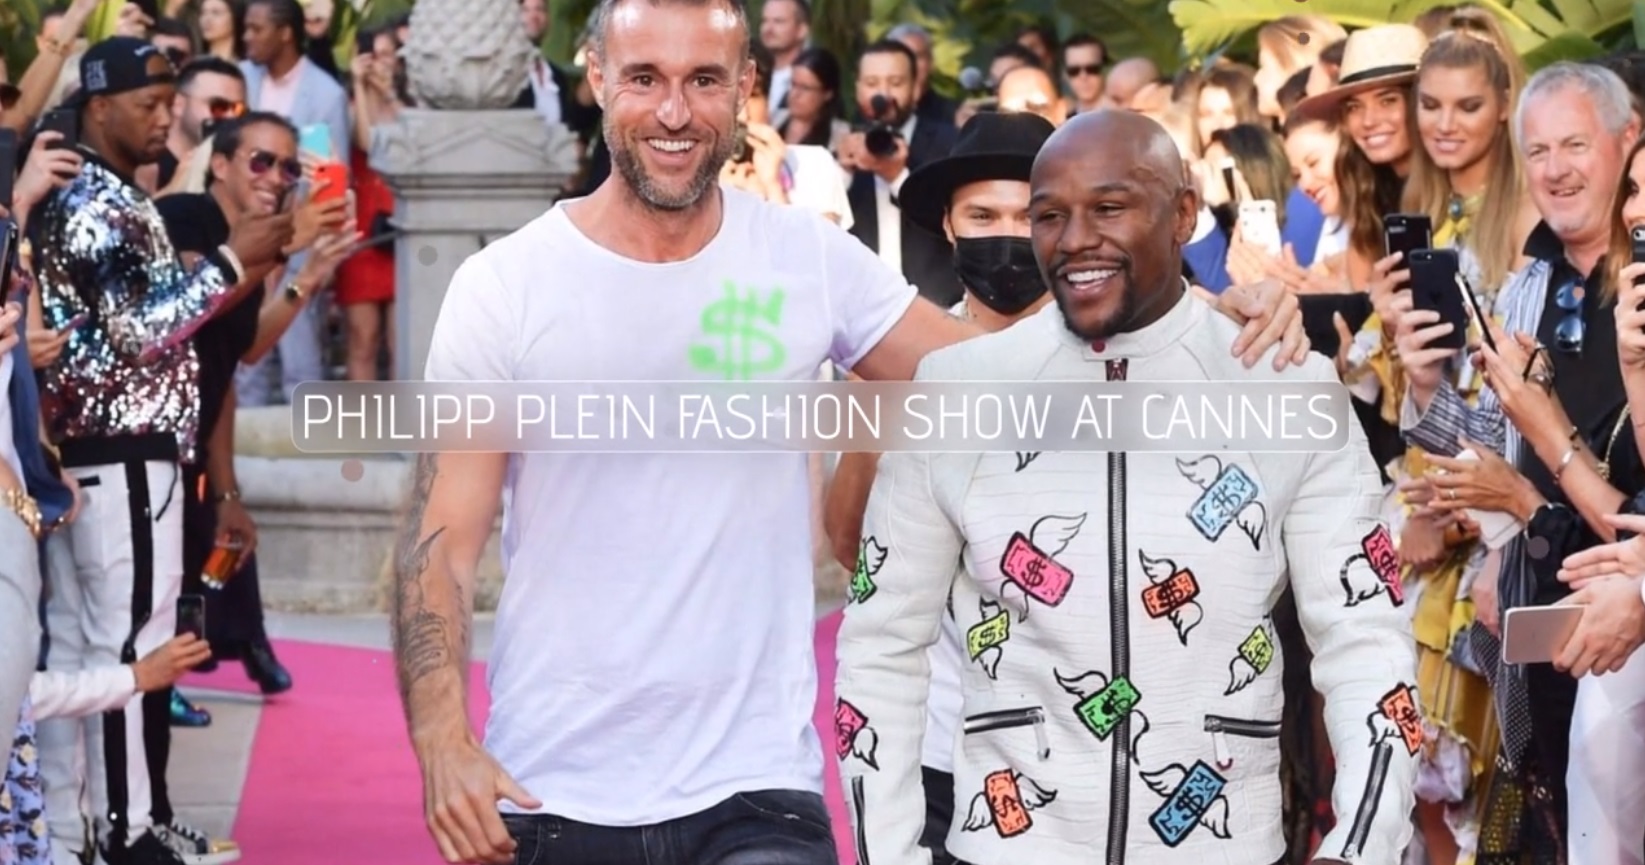 buy VIP tickets to hilip Plein Fashion Show at Cannes film festival